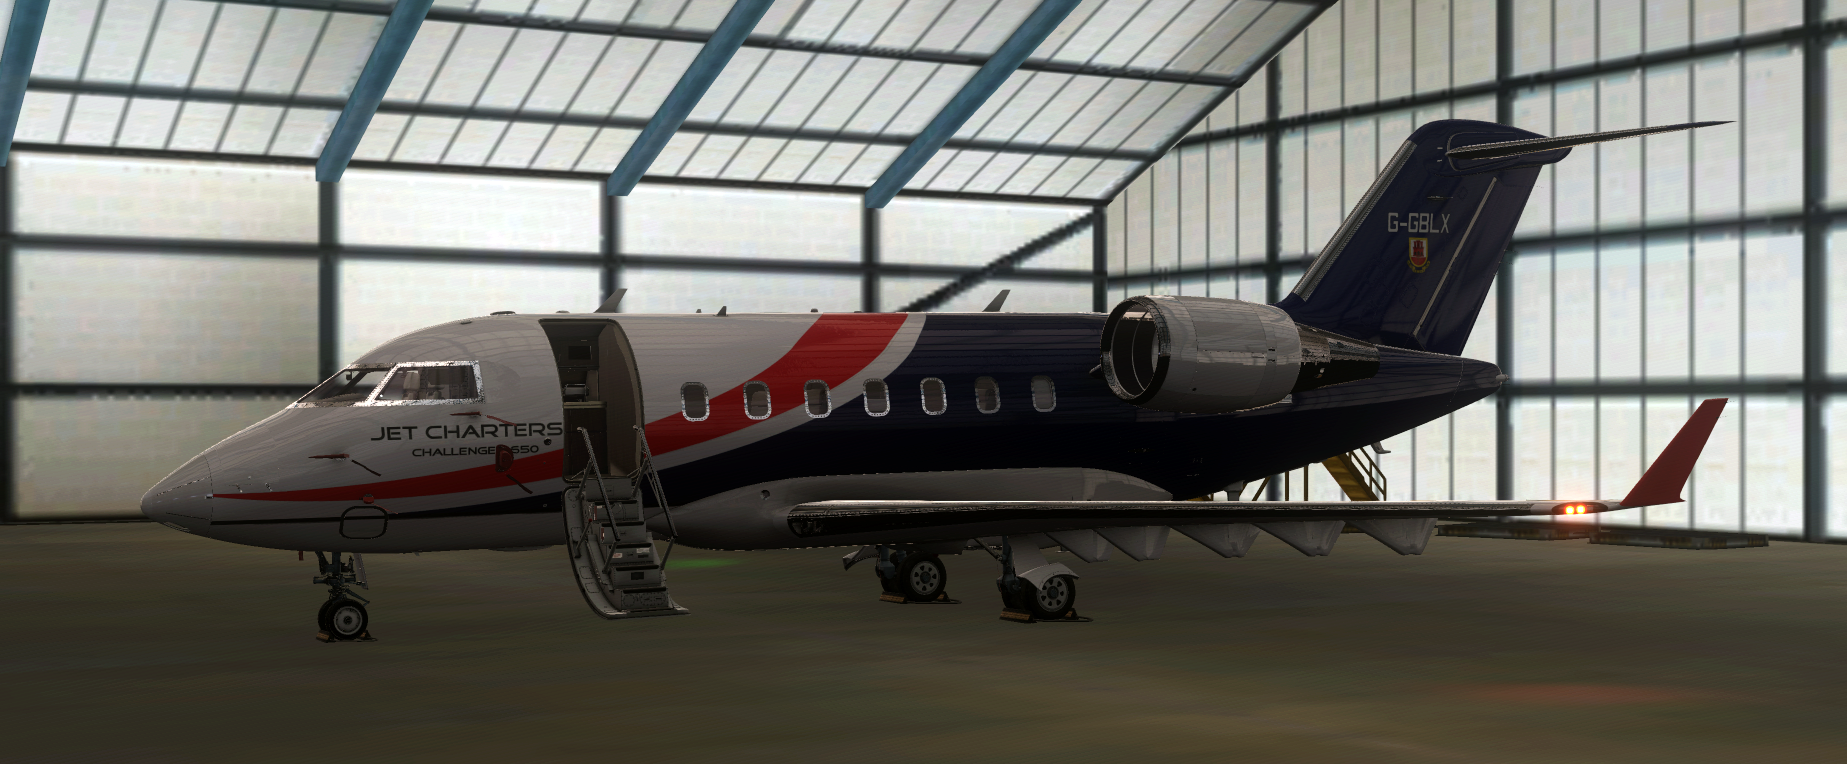 Challenger 650 - Jet Charters livery